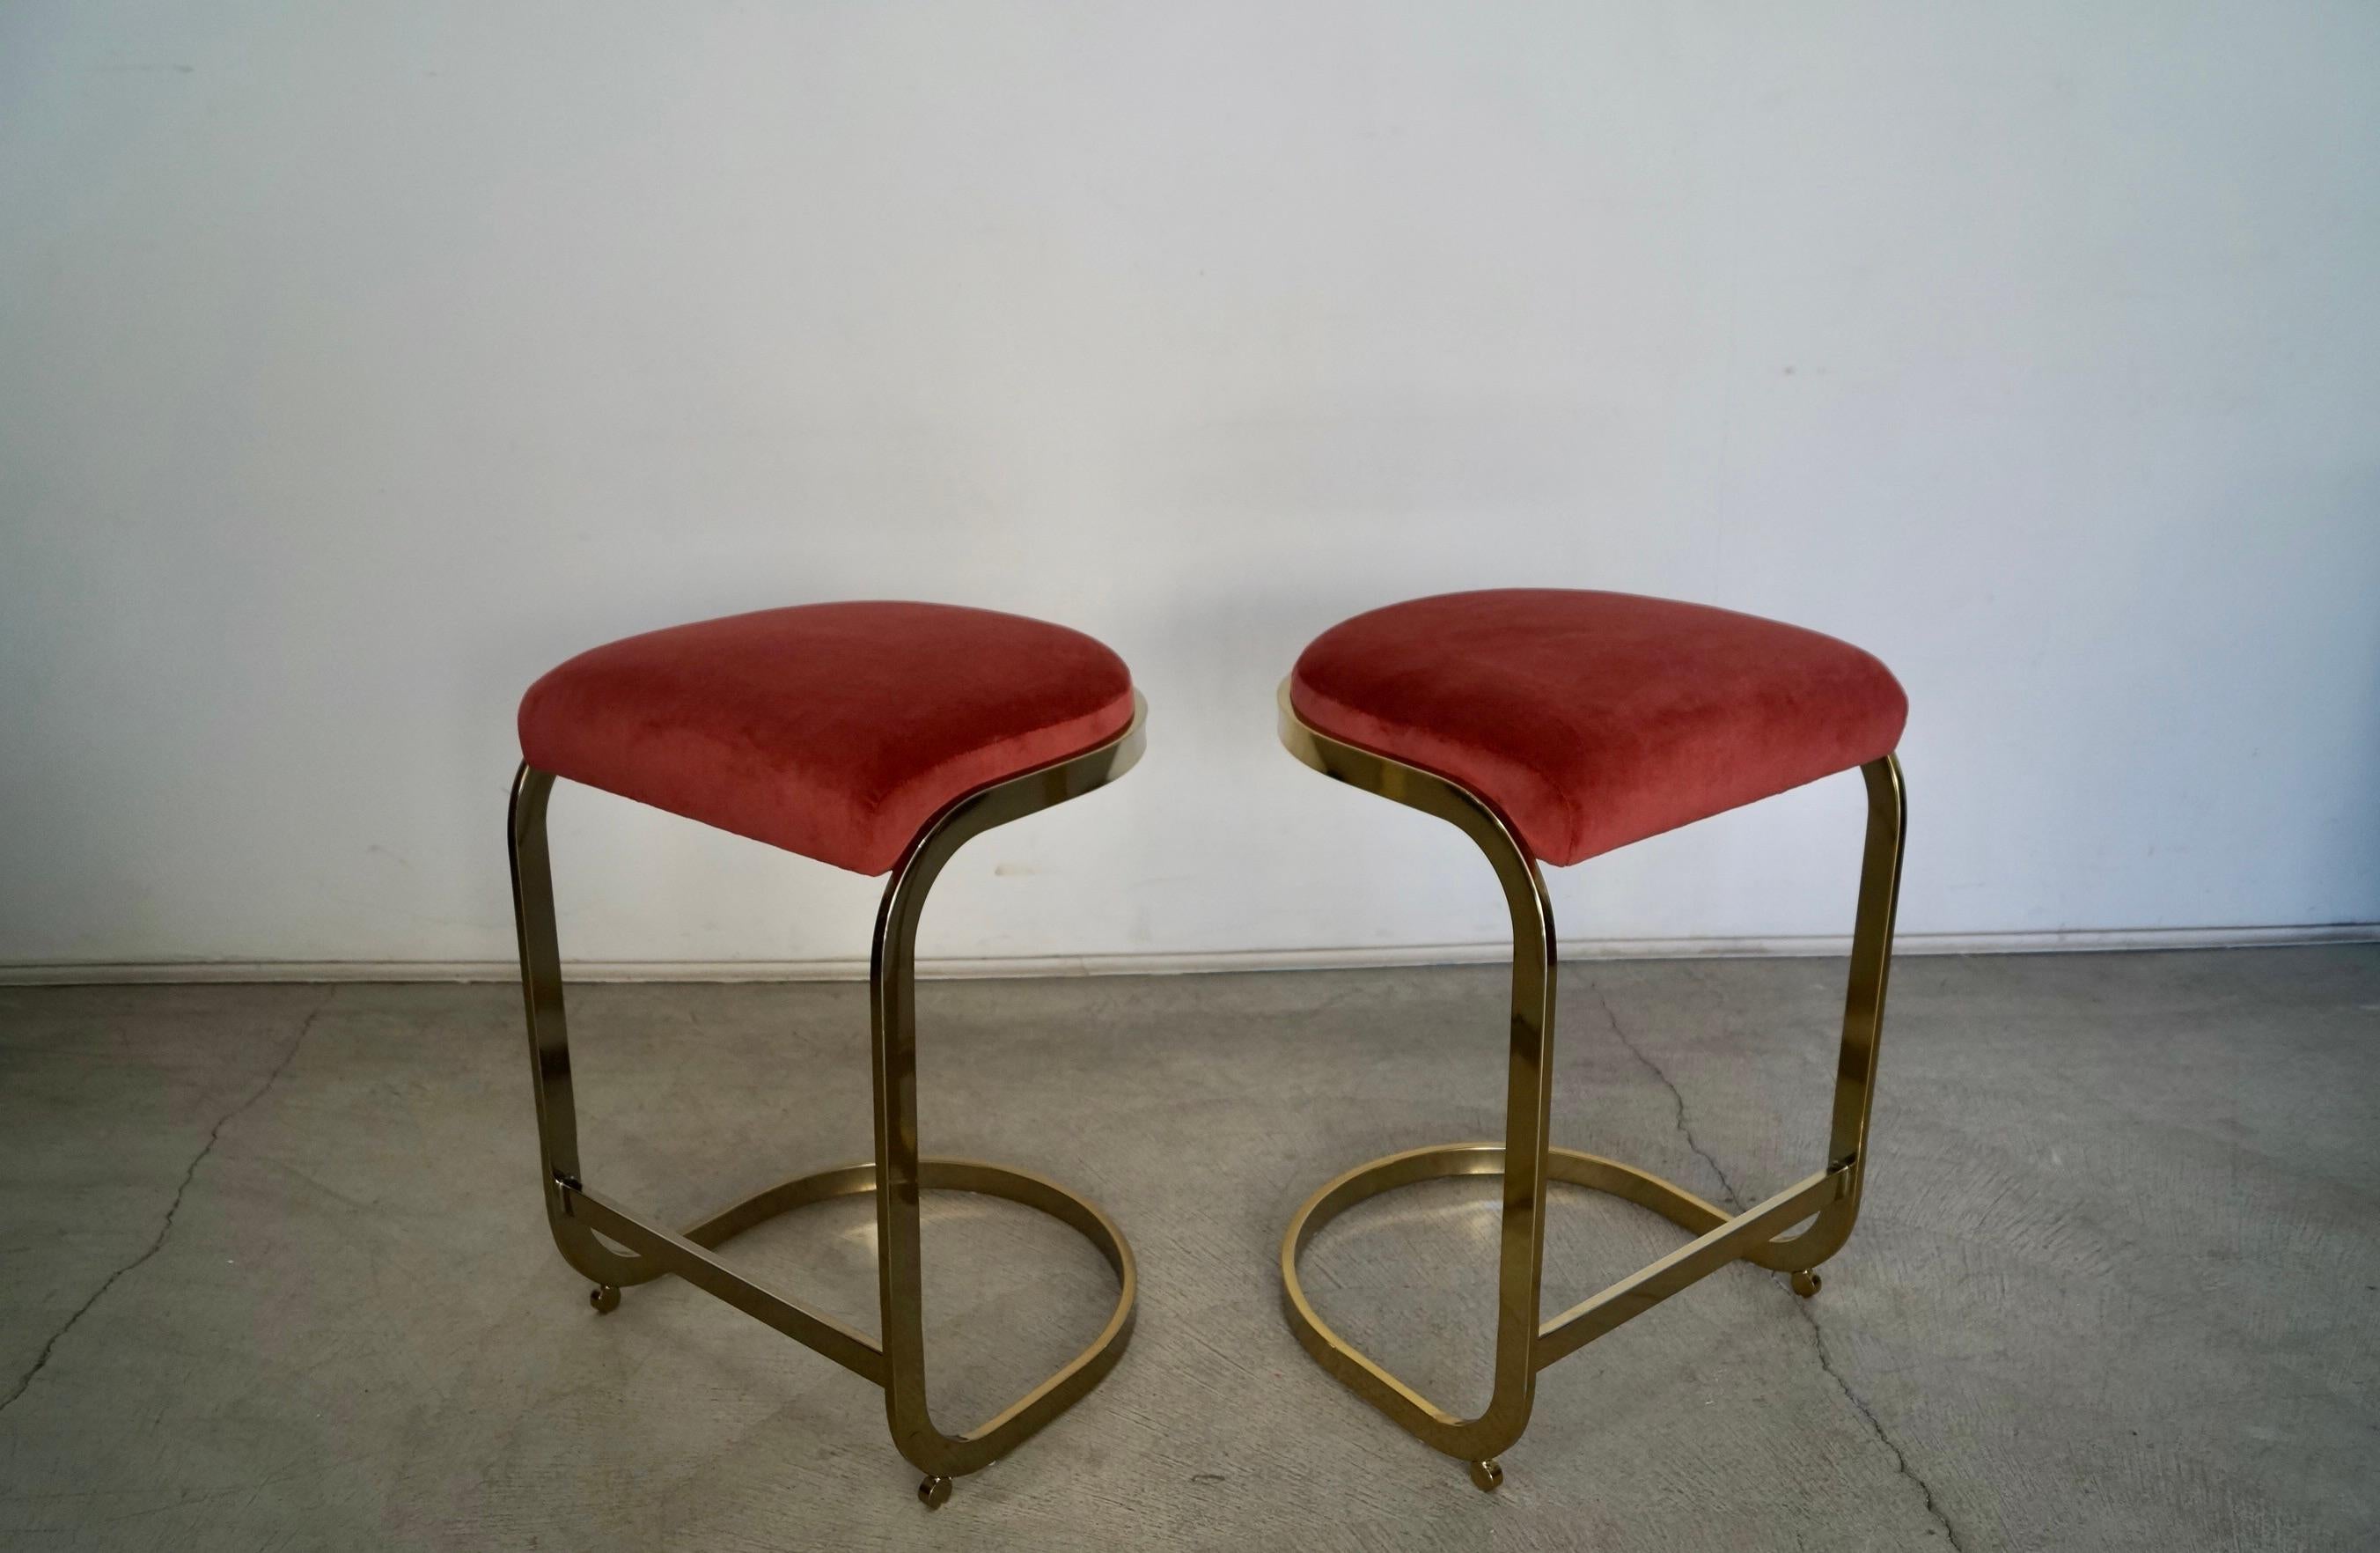 1970s Hollywood Regency Brass Counter Stools, a Pair In Excellent Condition For Sale In Burbank, CA